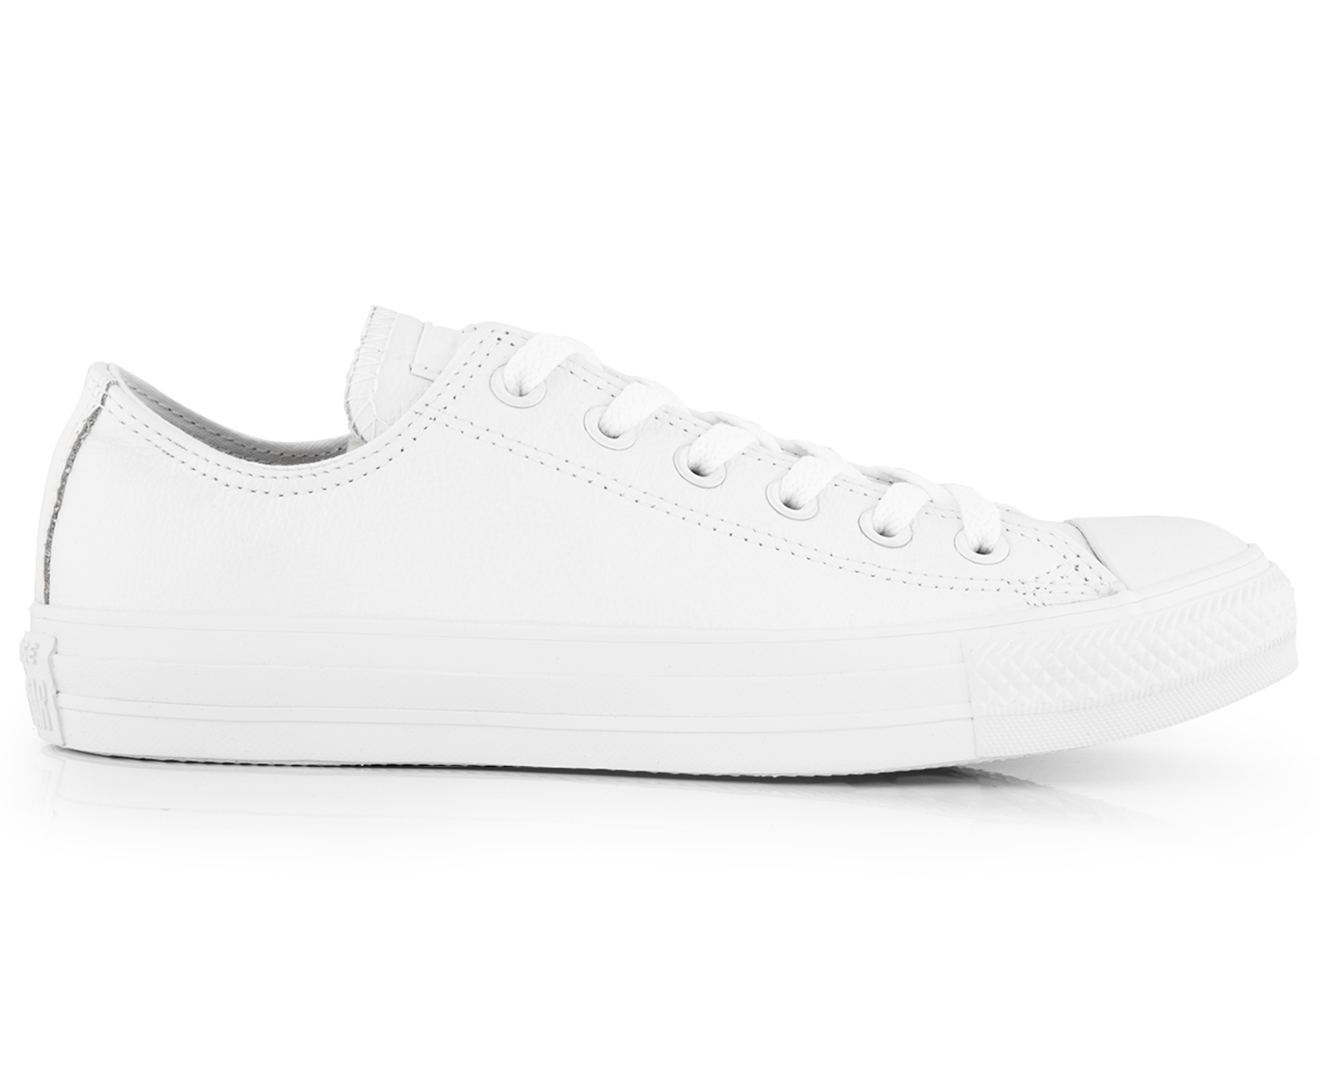 Converse Unisex Chuck Taylor All Star Low Top Leather Sneakers - White ...